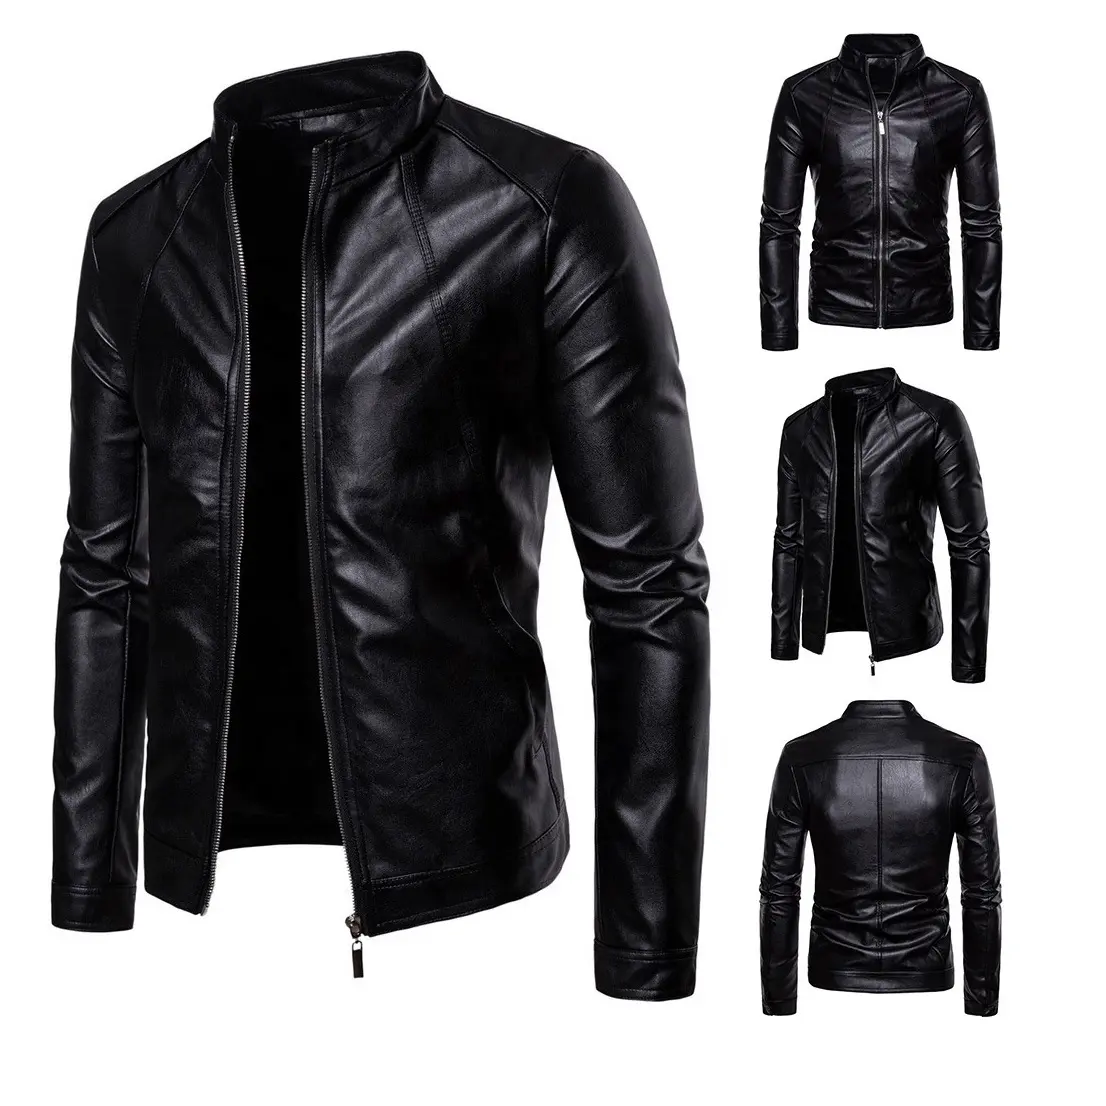 Fashion Designs Boys Classic Biker Jacket Motorcycle Pu Faux Leather Jacket for Mens blazer masculino slim fit Leather Coat